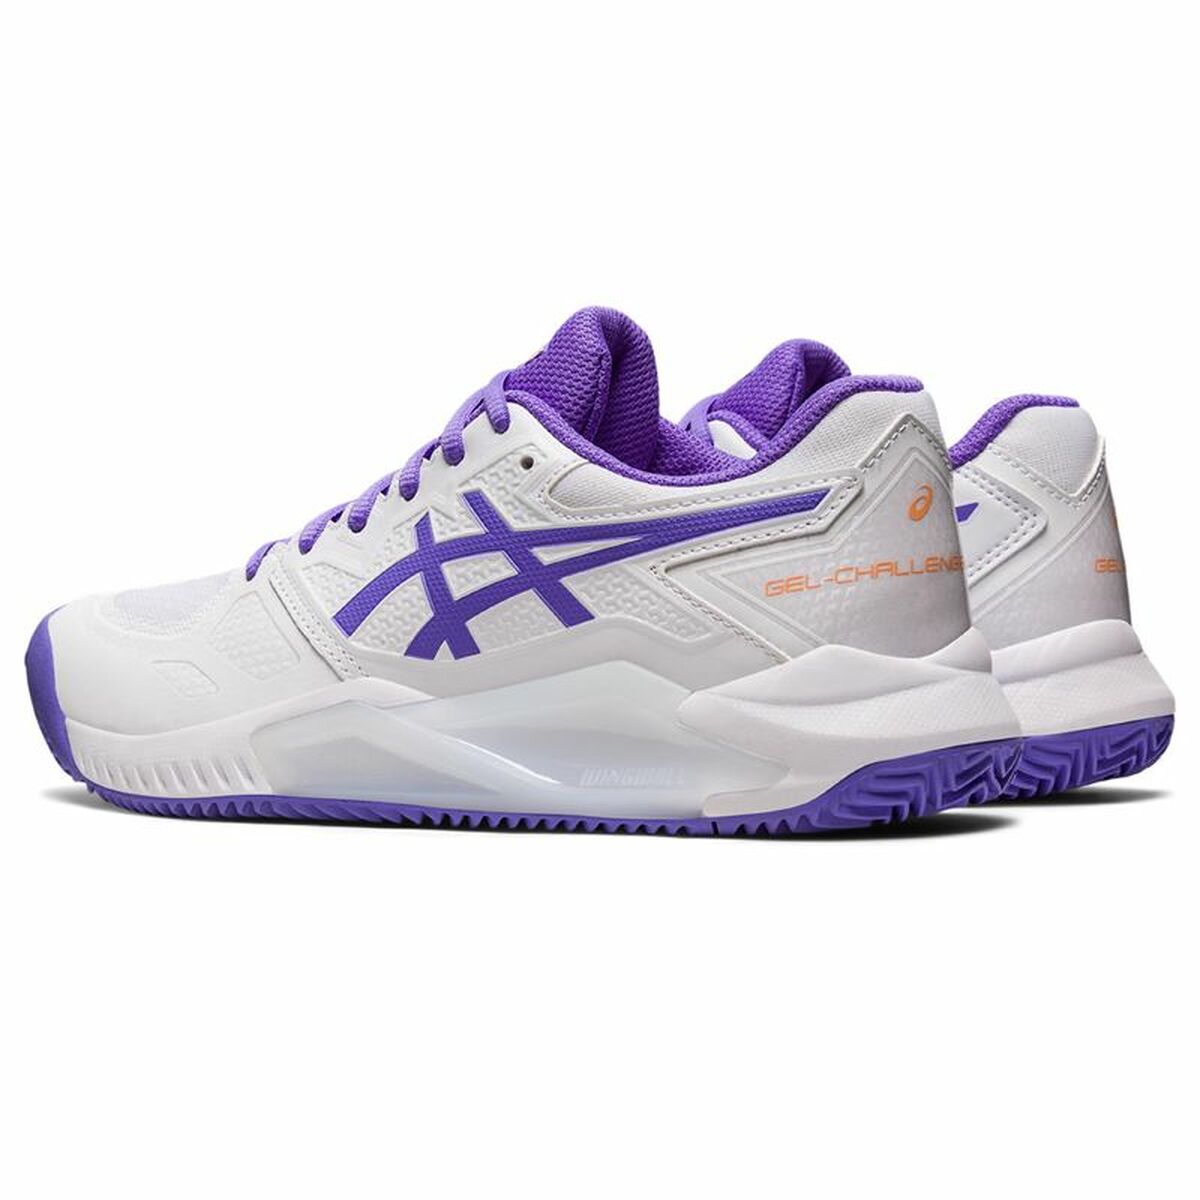 Women's Tennis Shoes Asics Gel-Challenger 13 Clay White